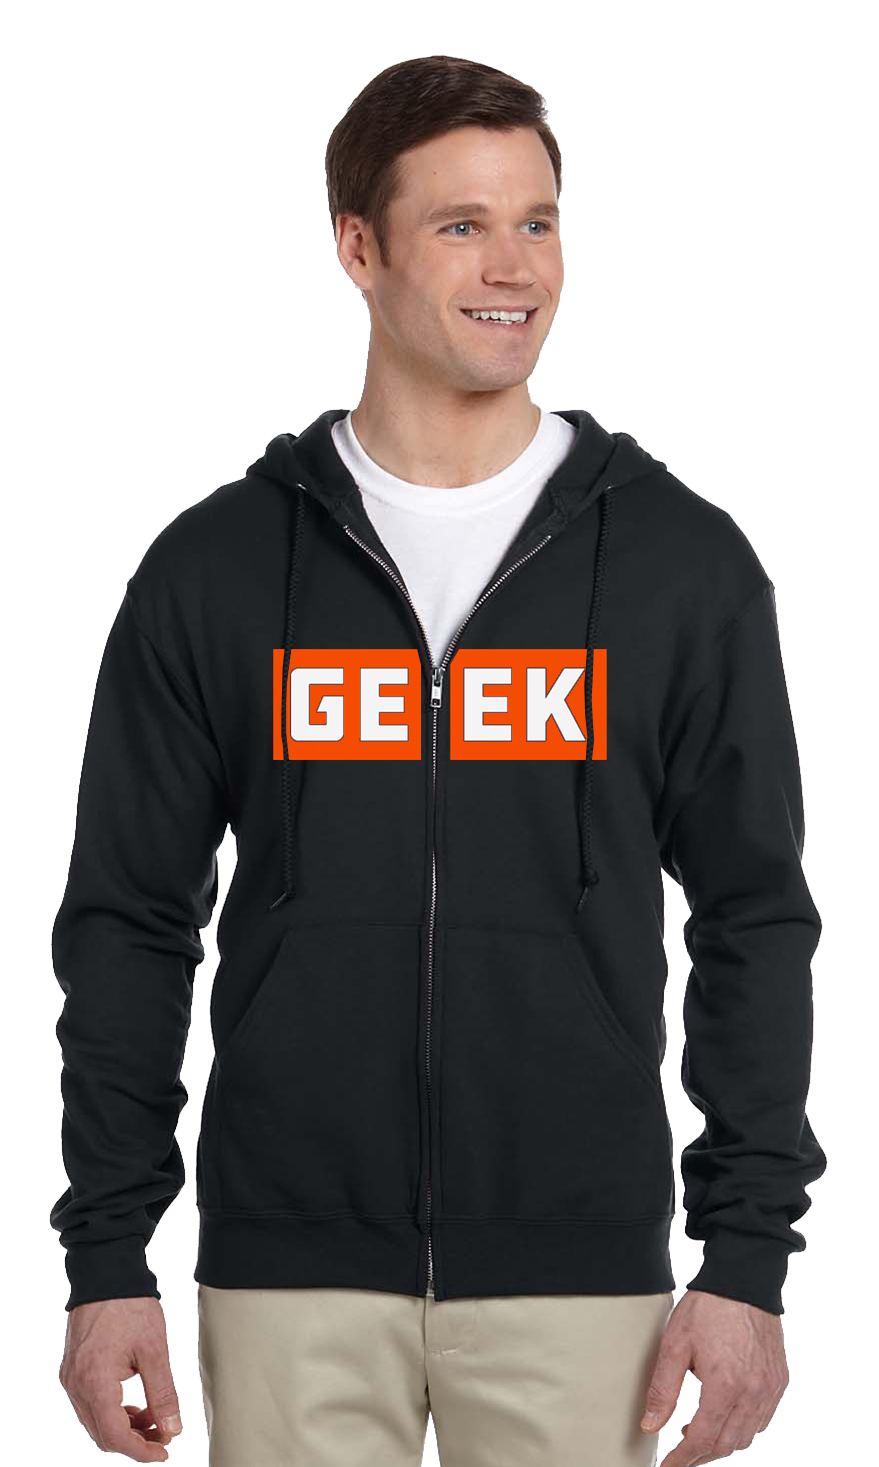 Full Zip GEEK Hoodie for use with the board game REORDER, sold at the BoardGameGeek Store